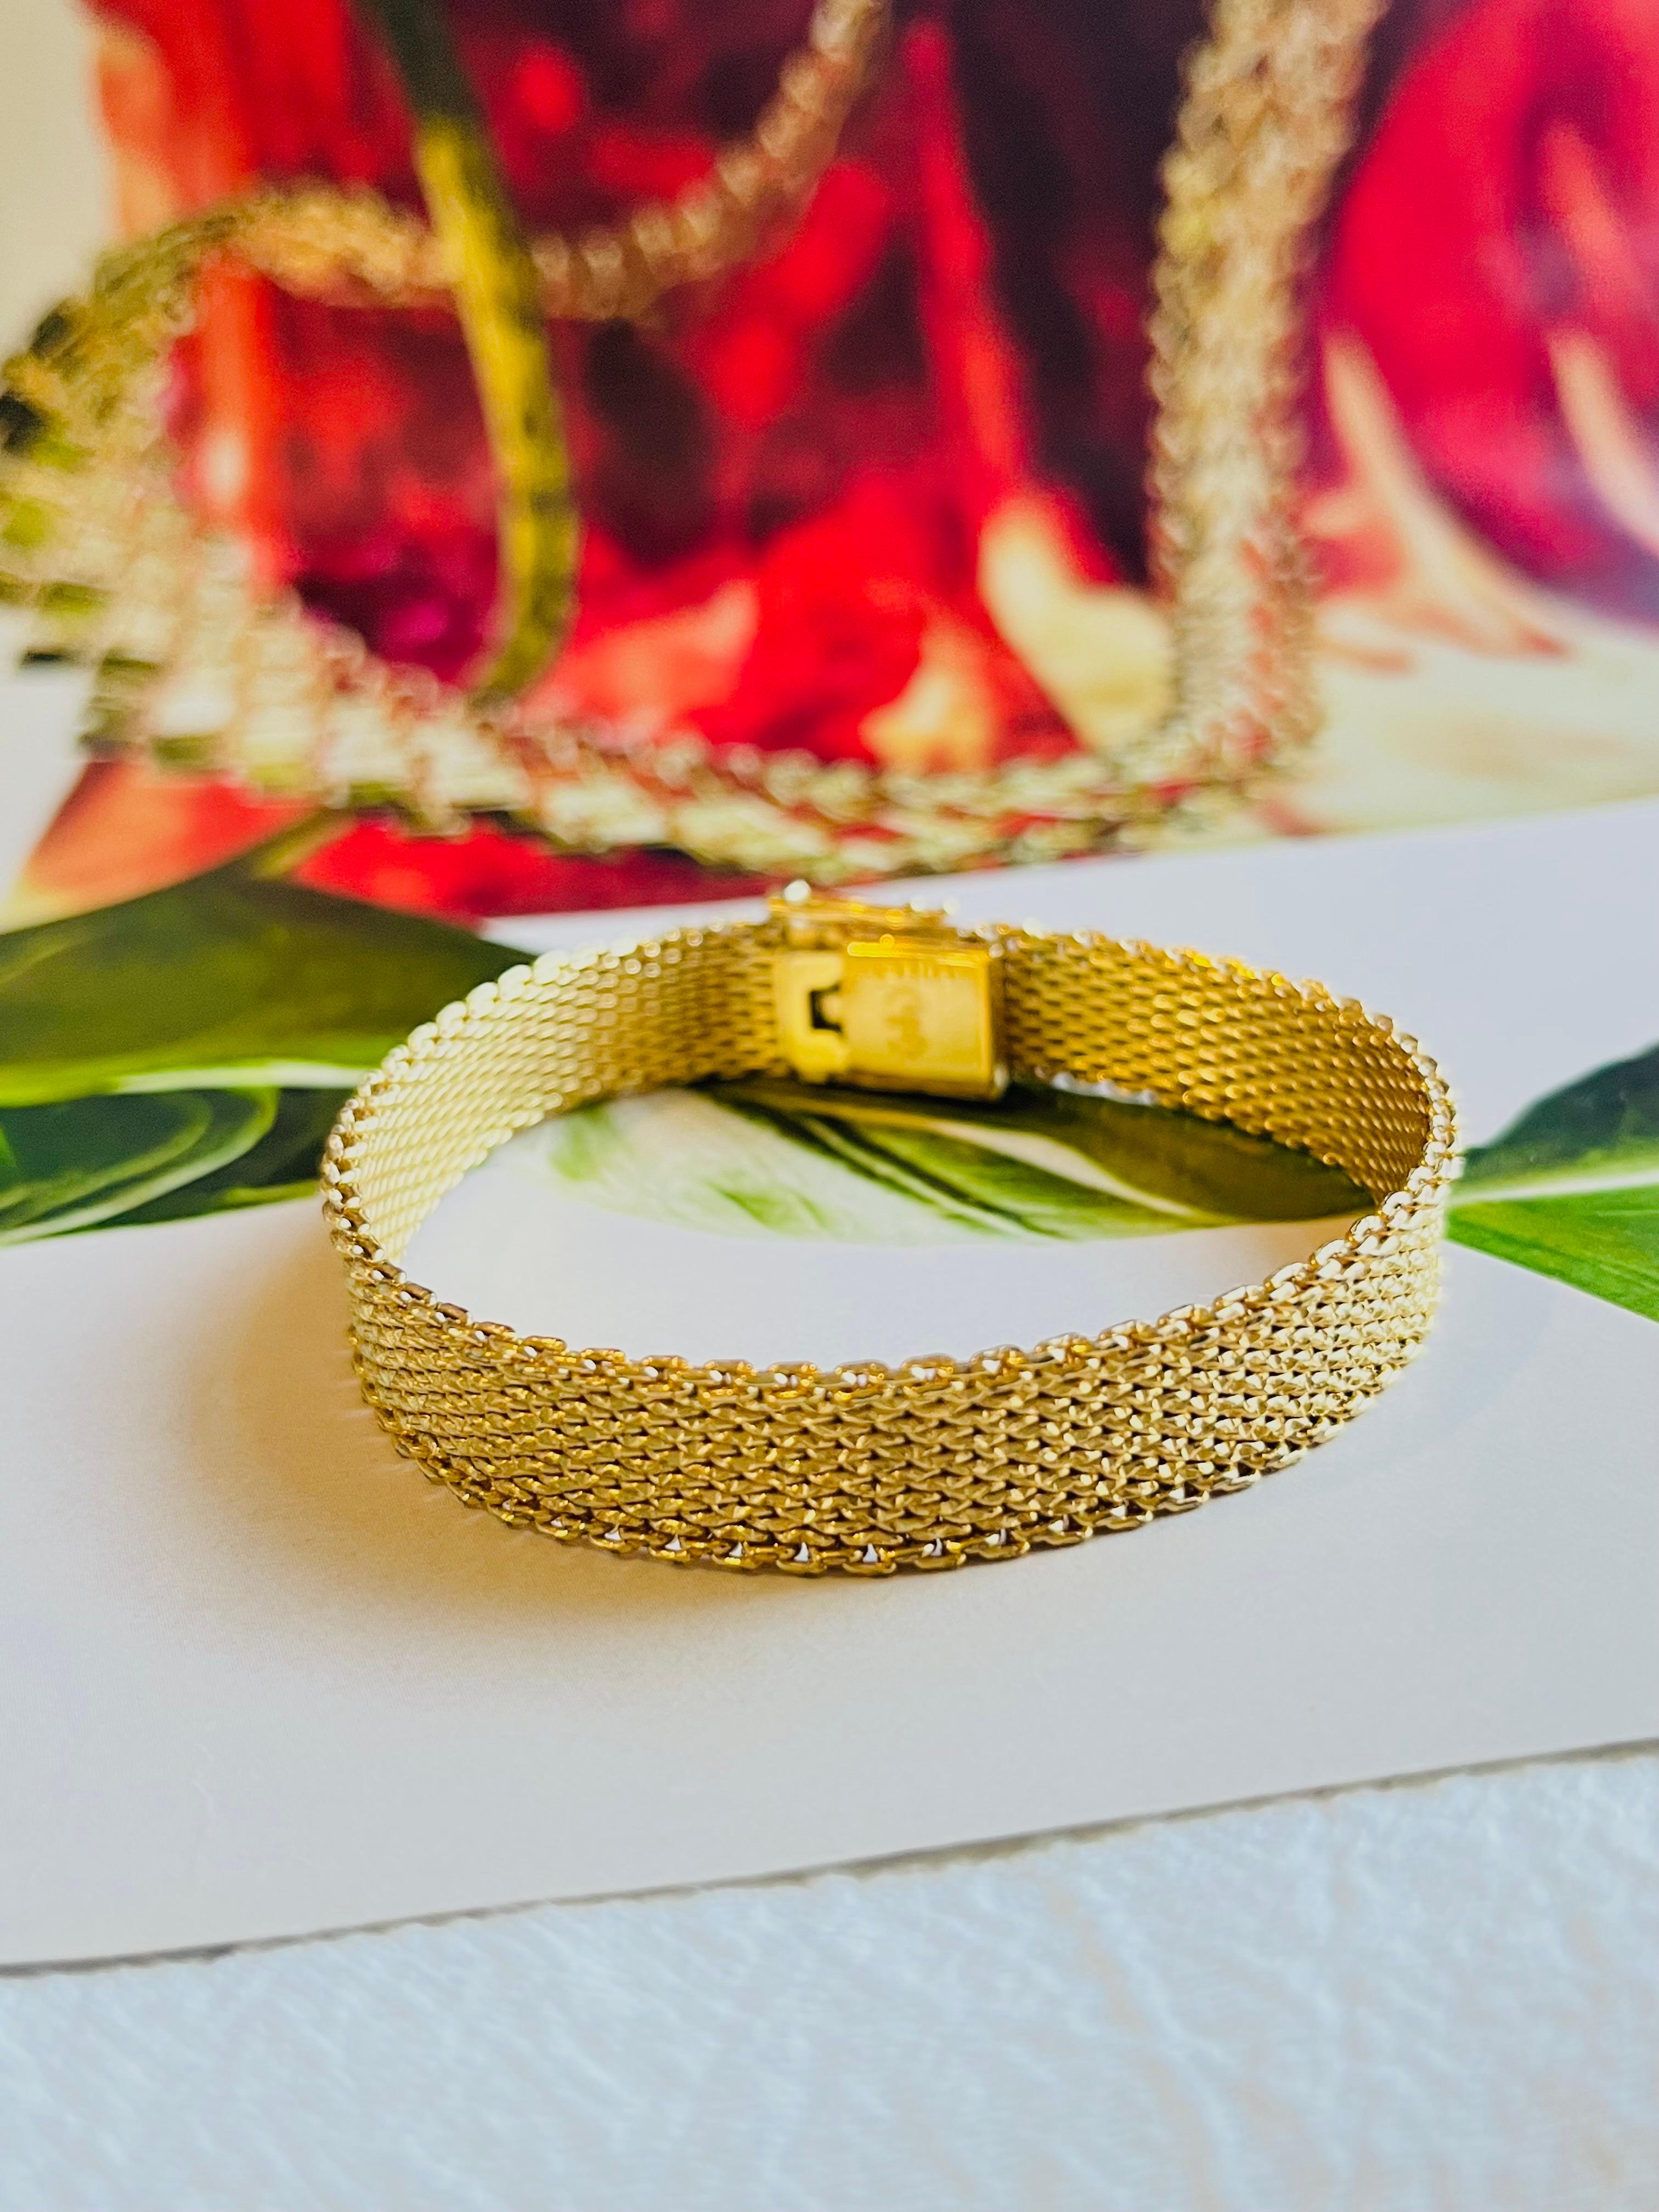 A very beautiful bracelet by Chr. DIOR GROSSE, signed at the back.

Very good condition. Some light scratches or colour loss. Barely noticeable. 100% Genuine.

Size: 18.0 *1.0 cm.

Weight: 19 g.

_ _ _

Great for everyday wear. Come with velvet